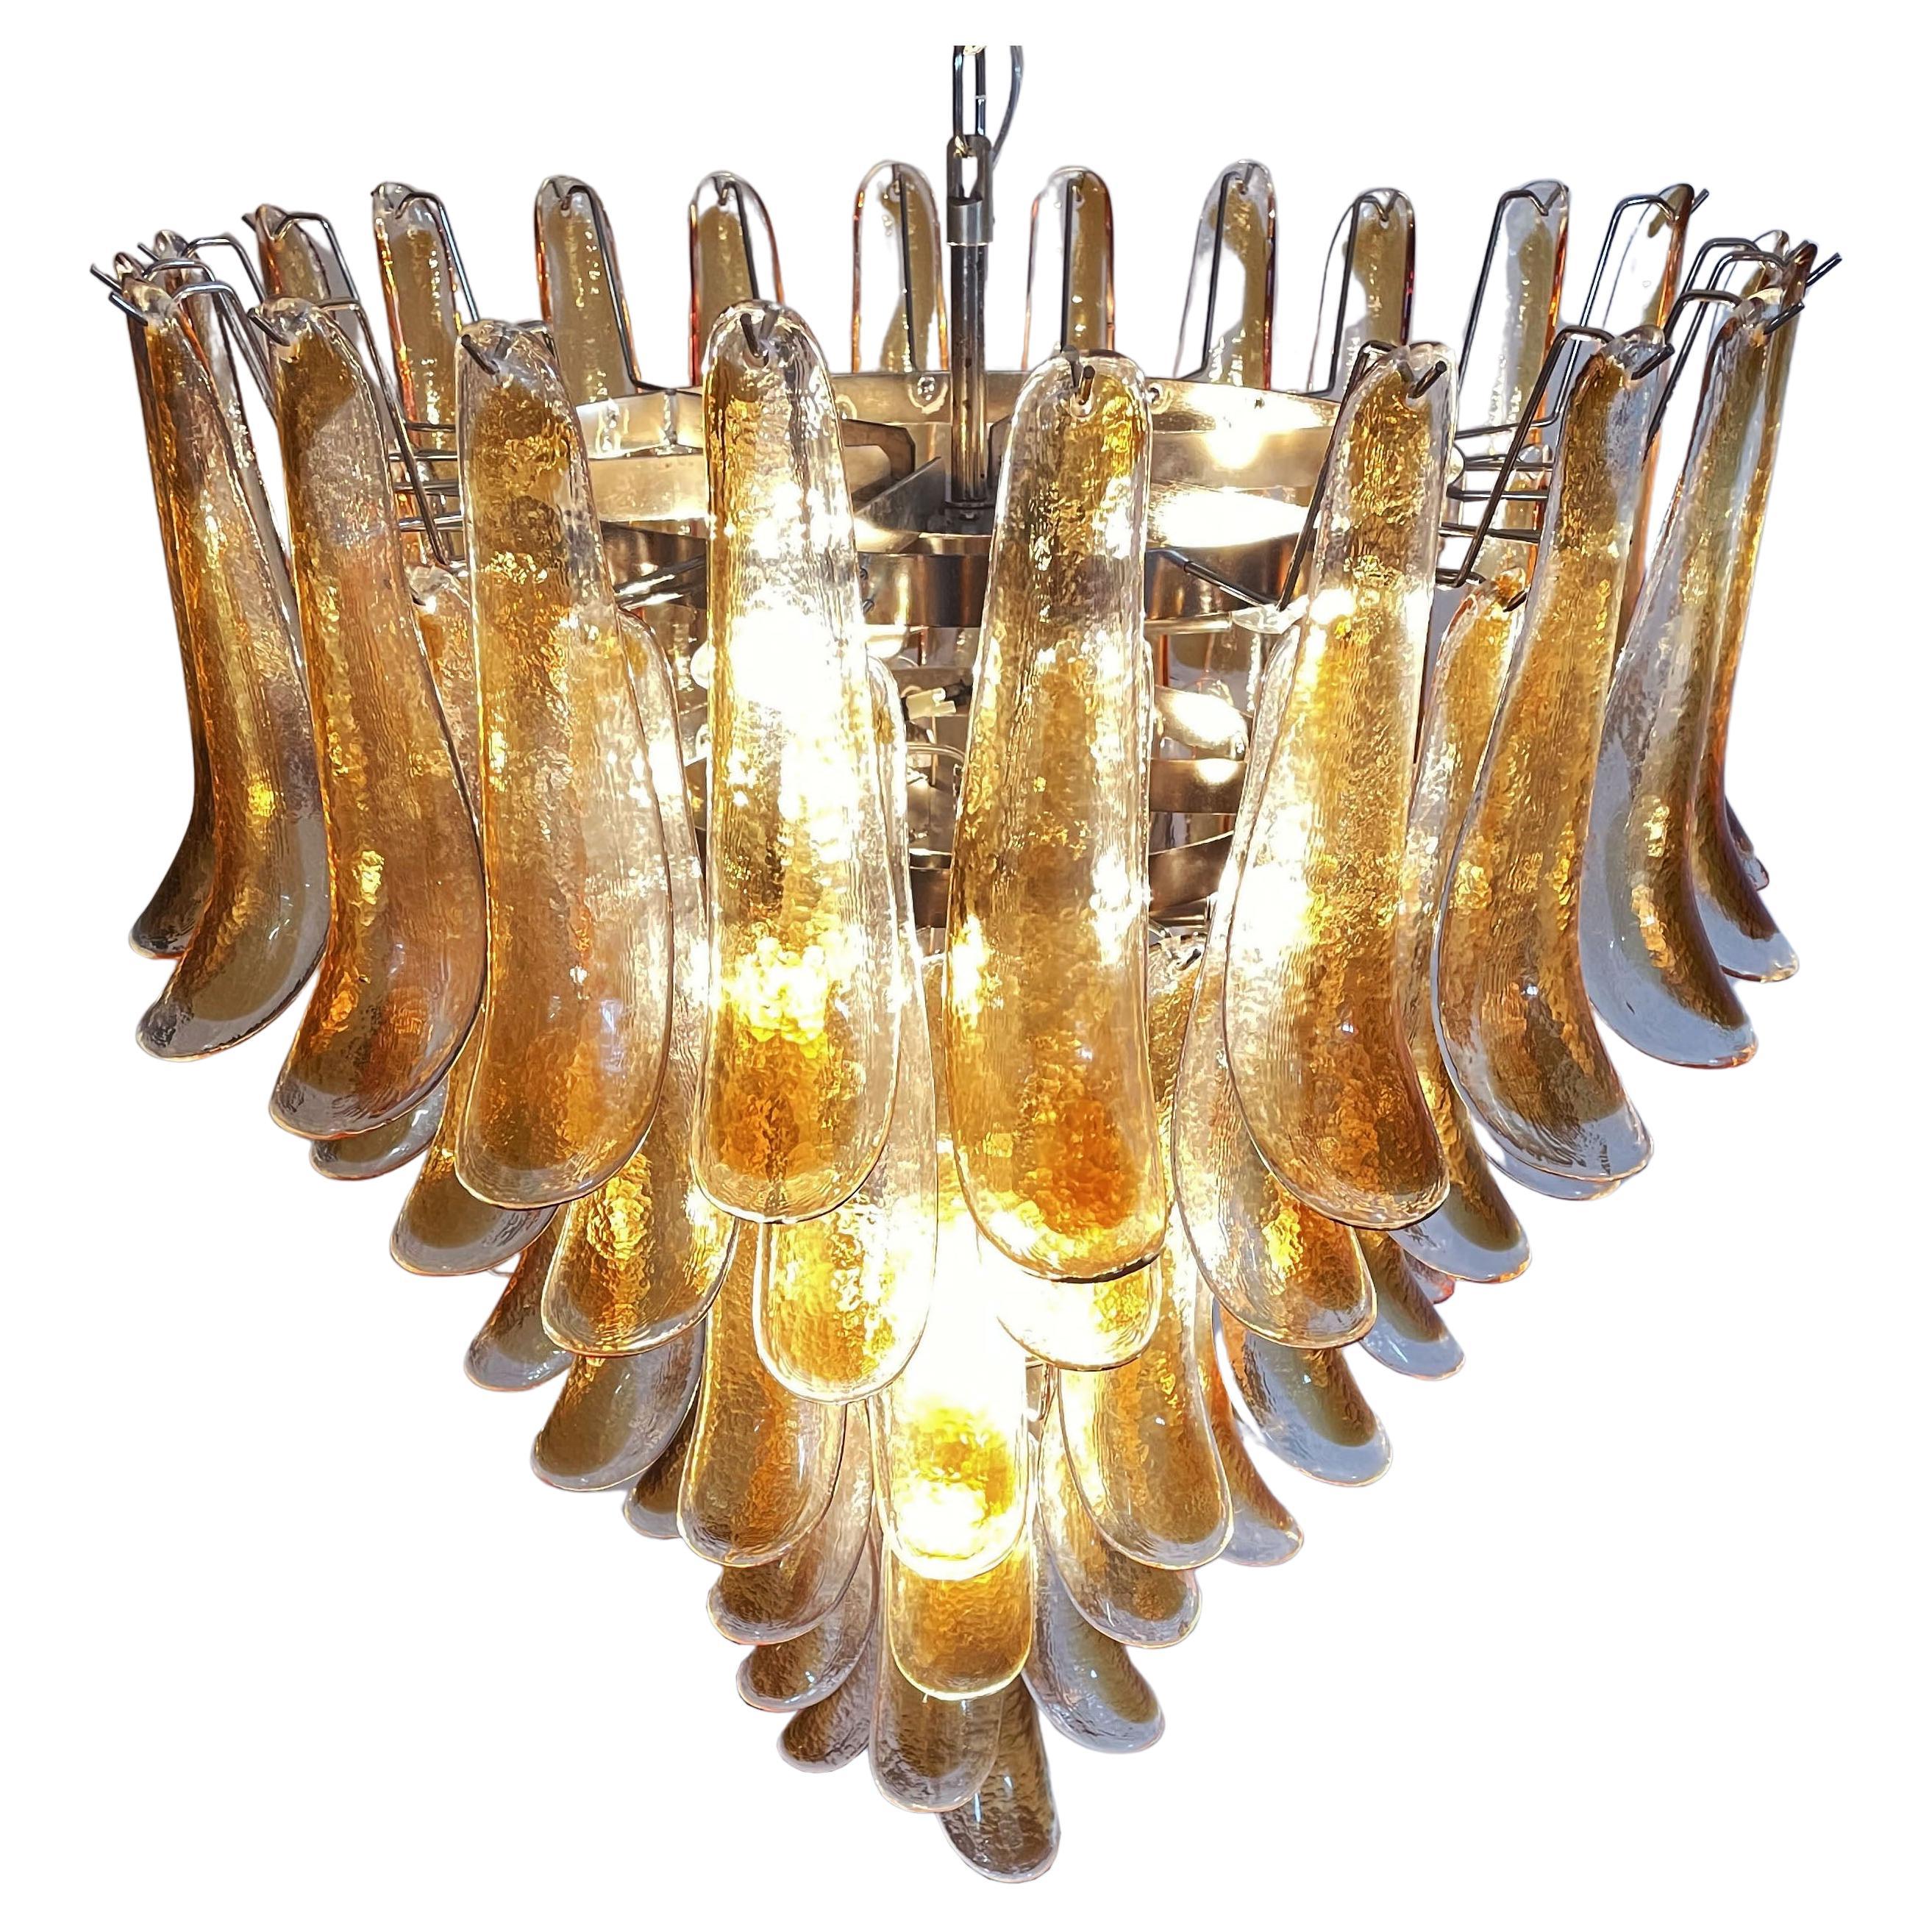  Italian vintage Murano chandelier made by 75 glass petals transparent with an amber spot inside, nickel metal structure. The glasses are very high quality, the photos do not do the beauty, luster of these glasses.
Period:late XX century
Dimensions: